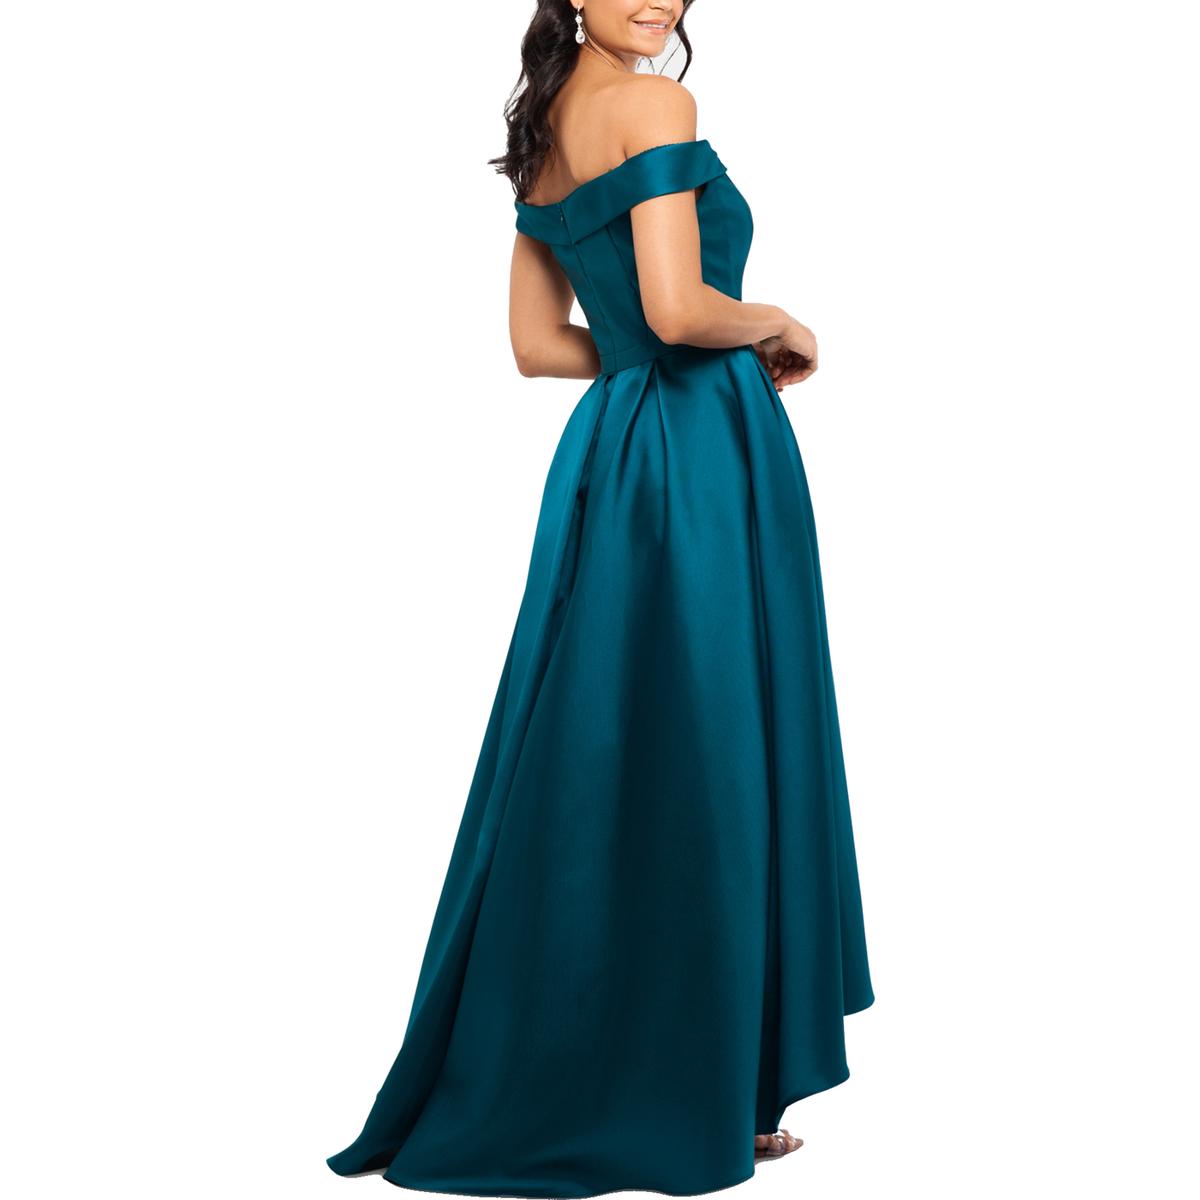 Xscape Womens Green Off-The-Shoulder Evening Formal Dress Gown 2 BHFO ...